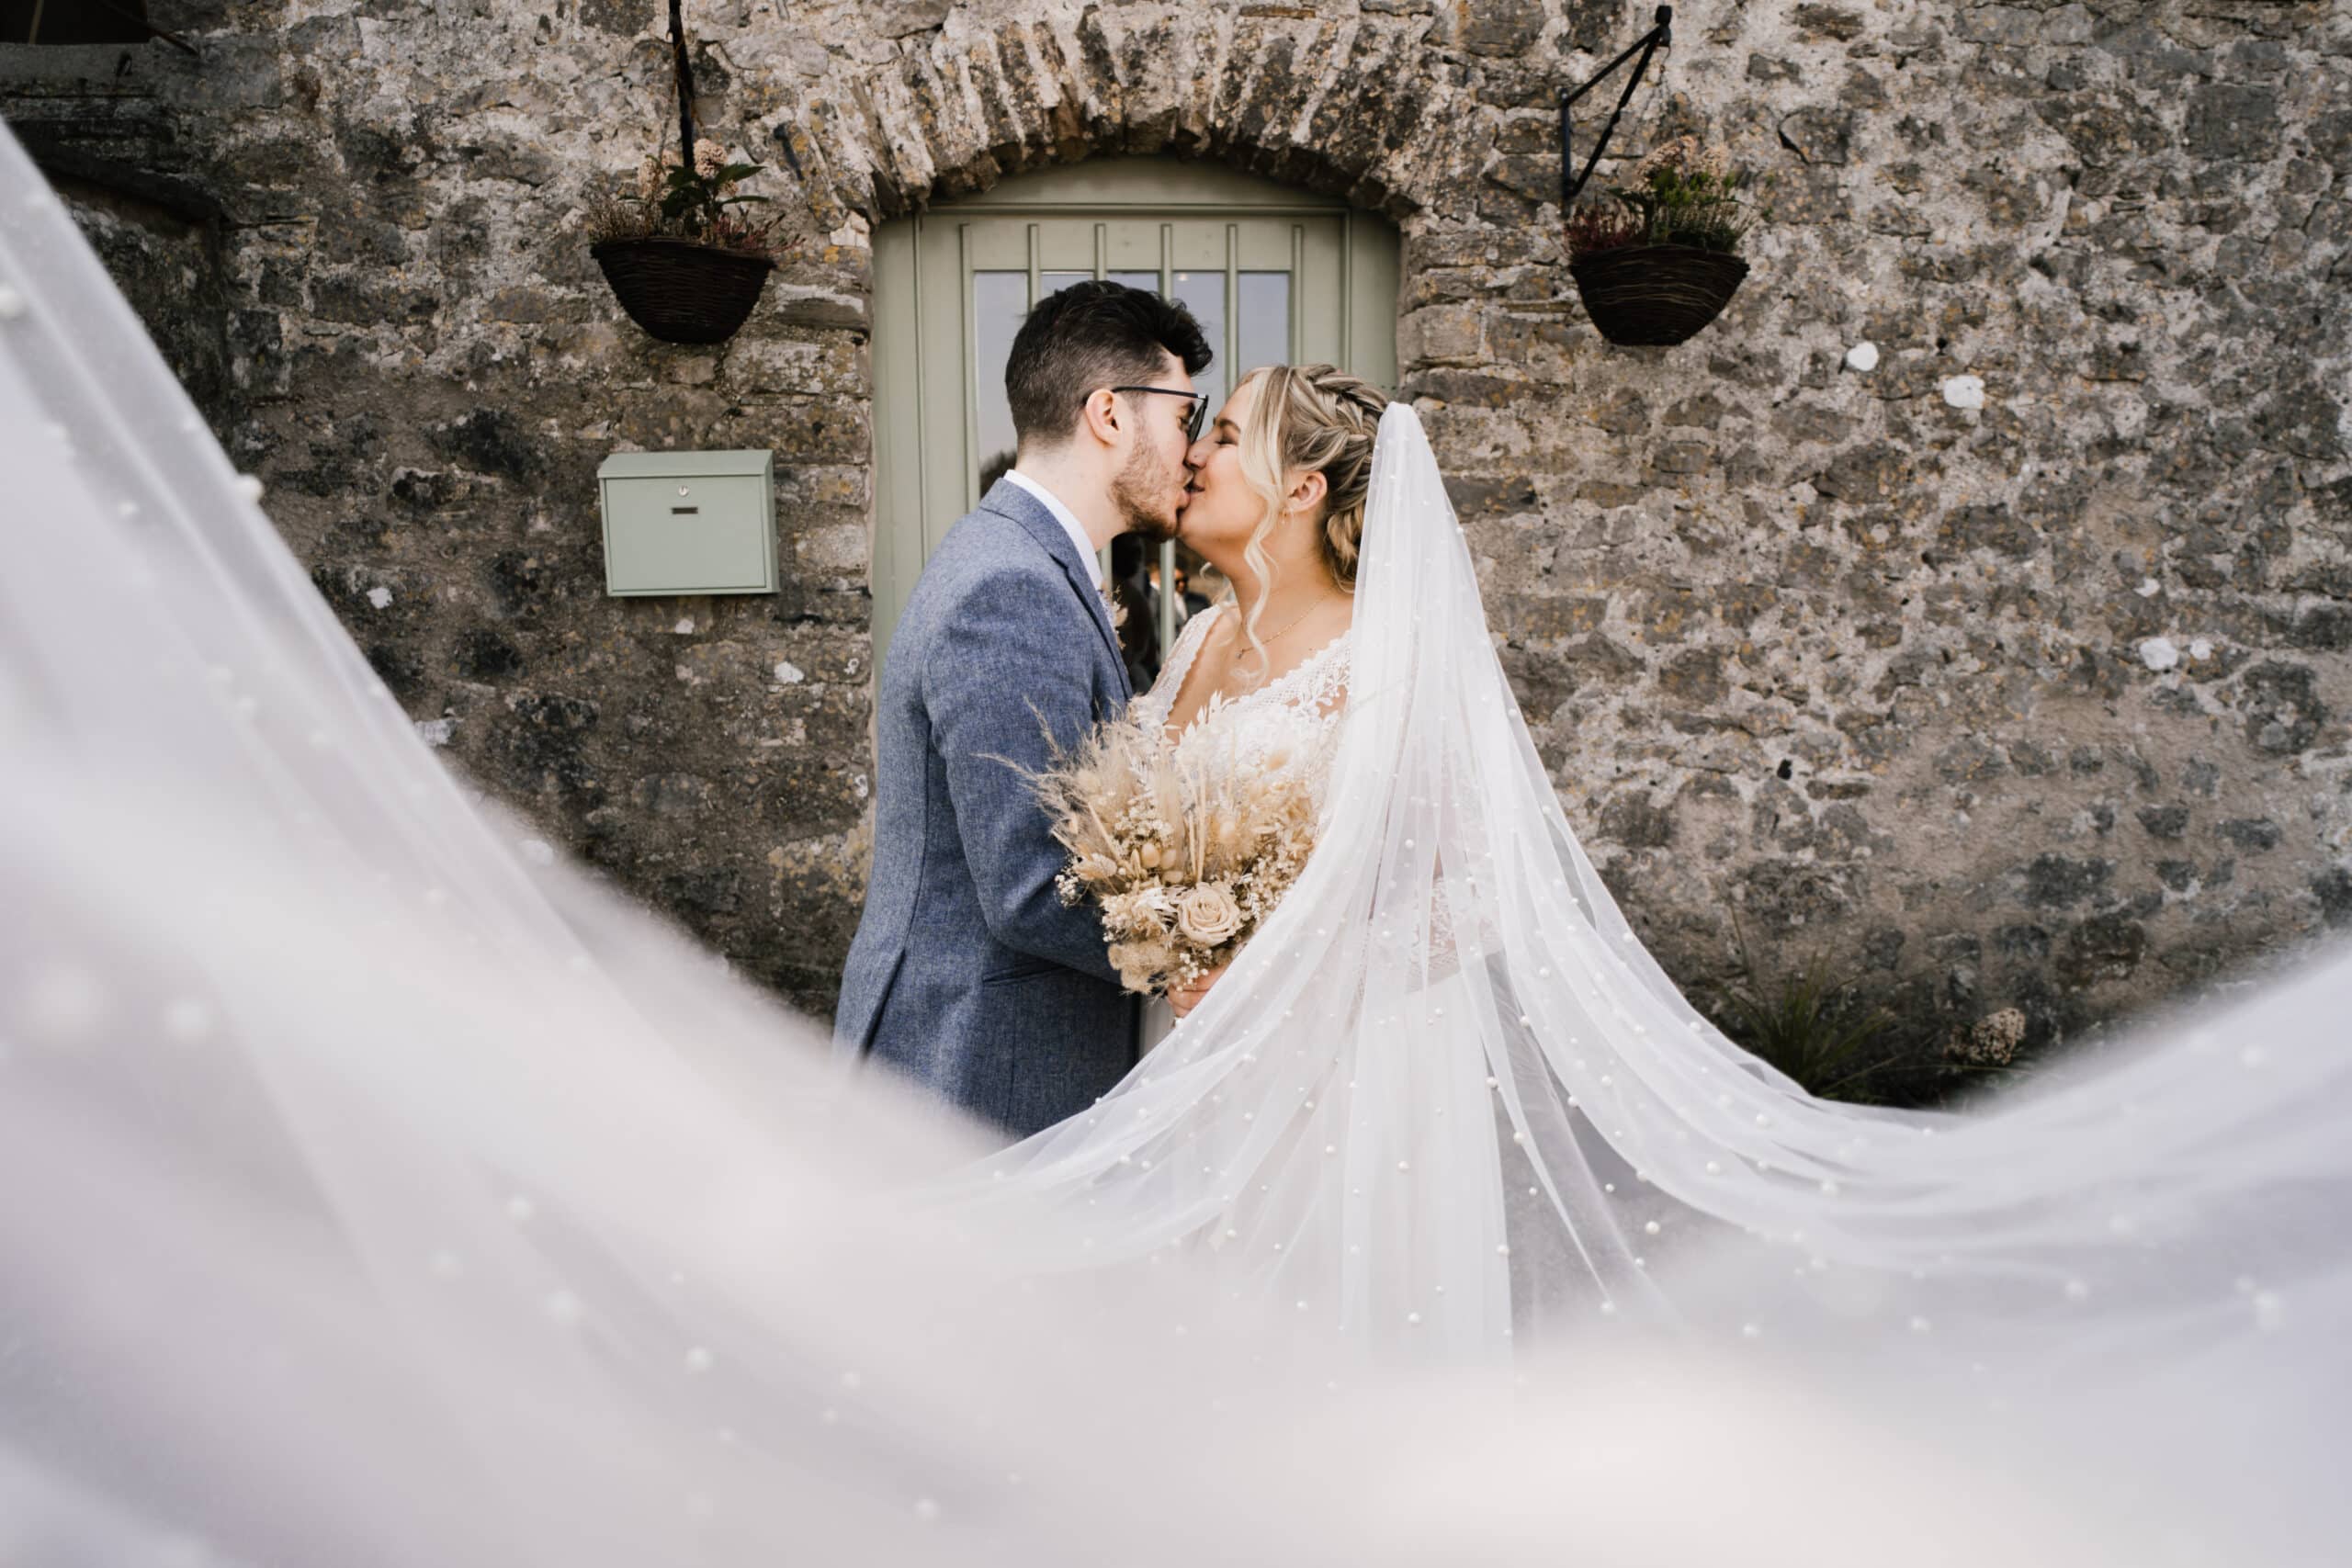 A bride and groom kiss outside a stone building, framed by the bride's flowing veil. she holds a bouquet, and hanging plants decorate the wall behind them.